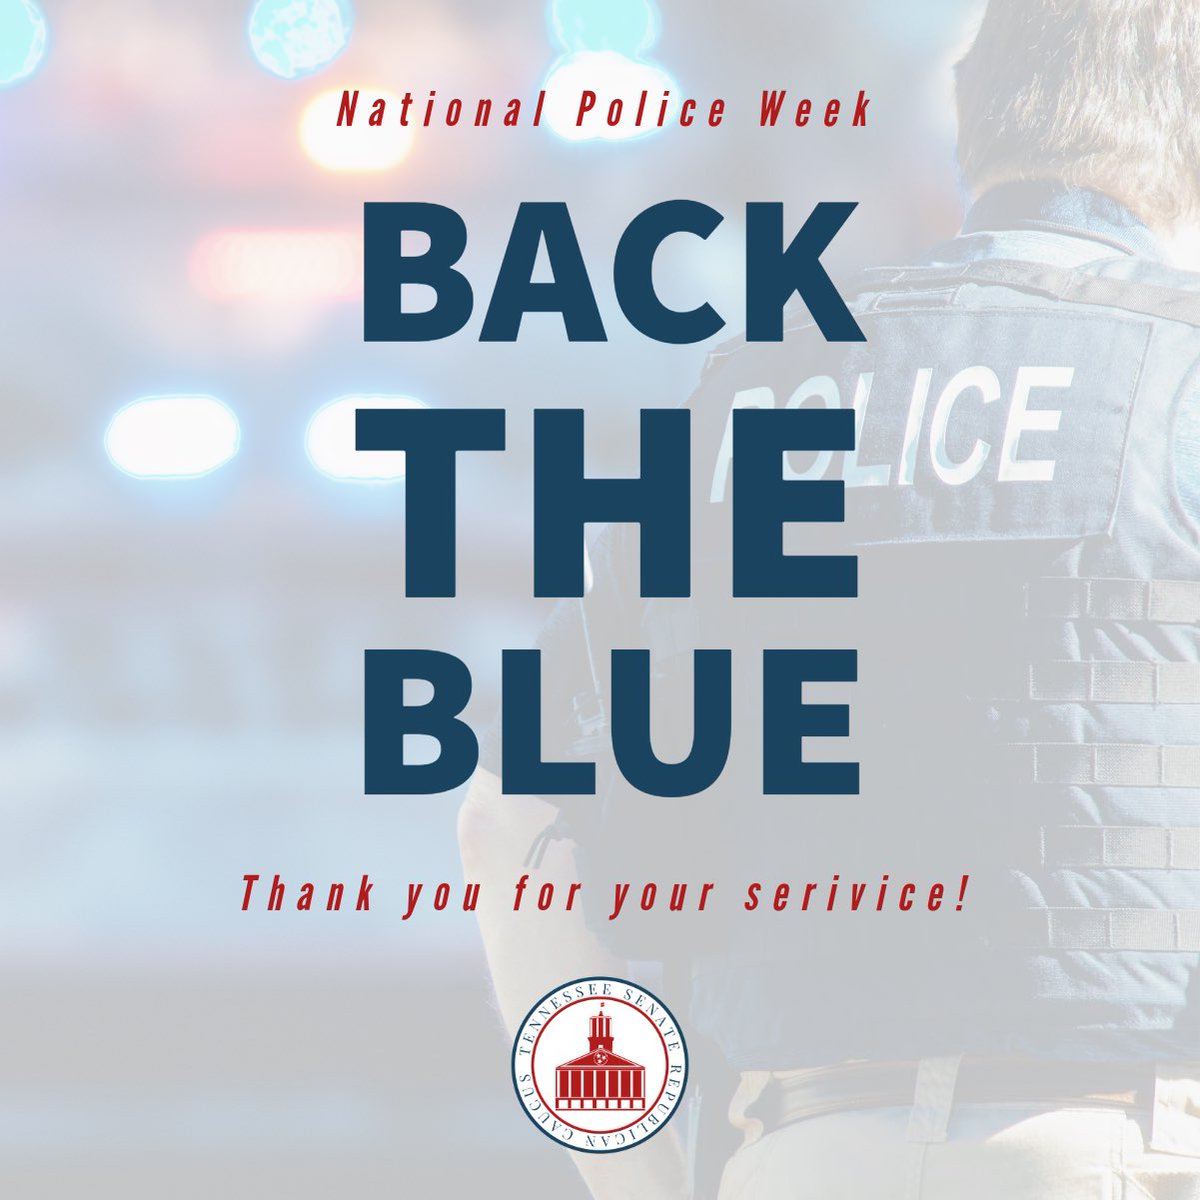 We support our police officers and are thankful for their service to the state of Tennessee. #backtheblue